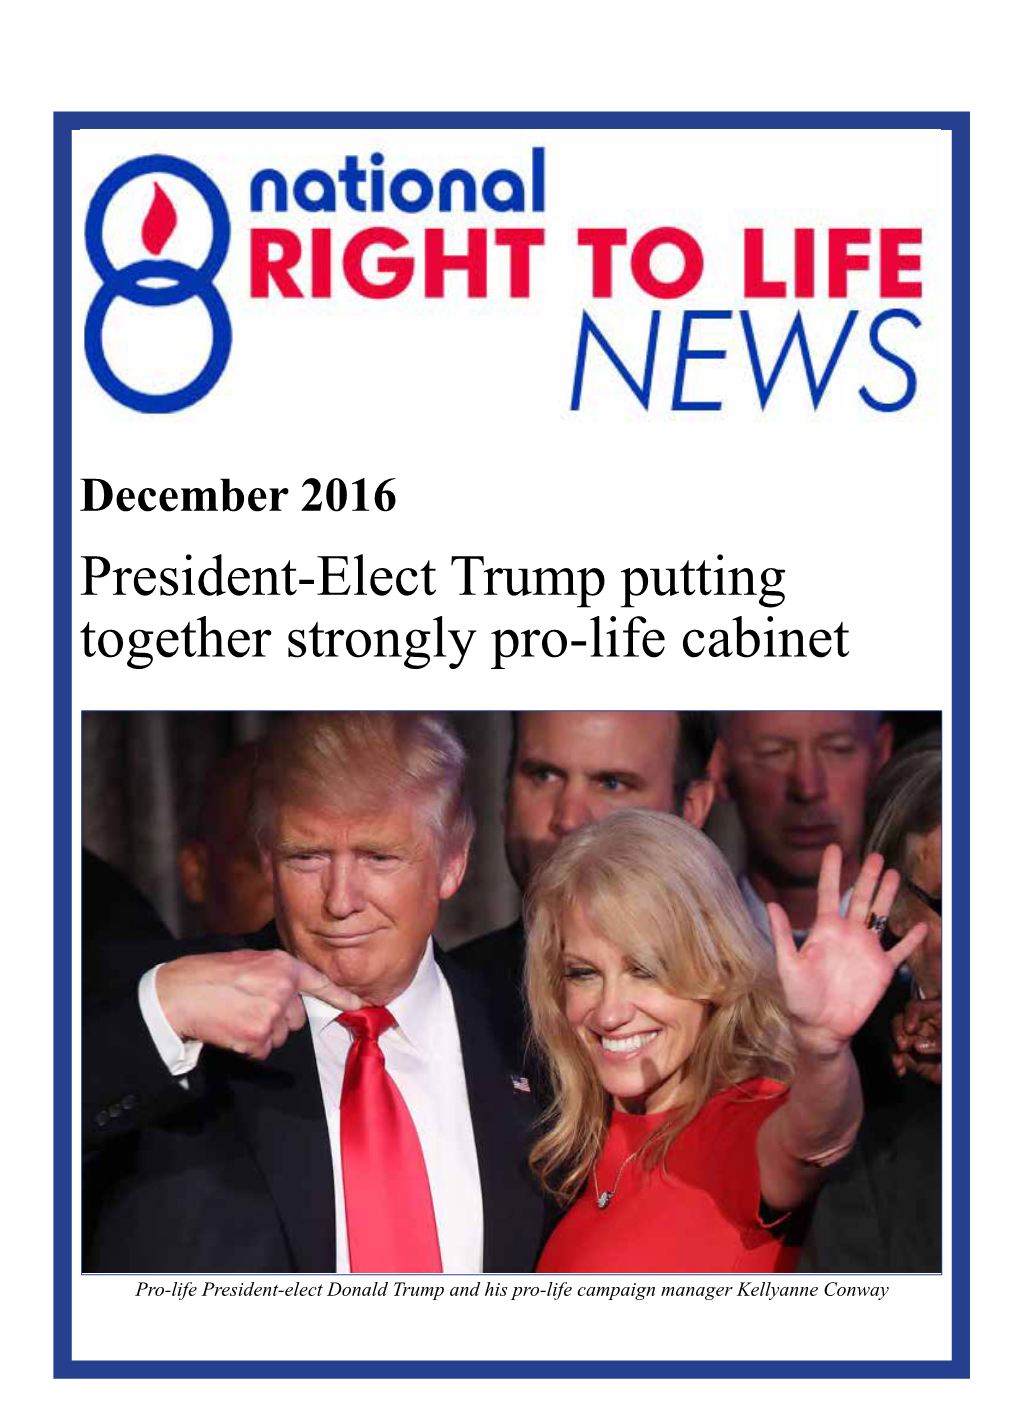 President-Elect Trump Putting Together Strongly Pro-Life Cabinet